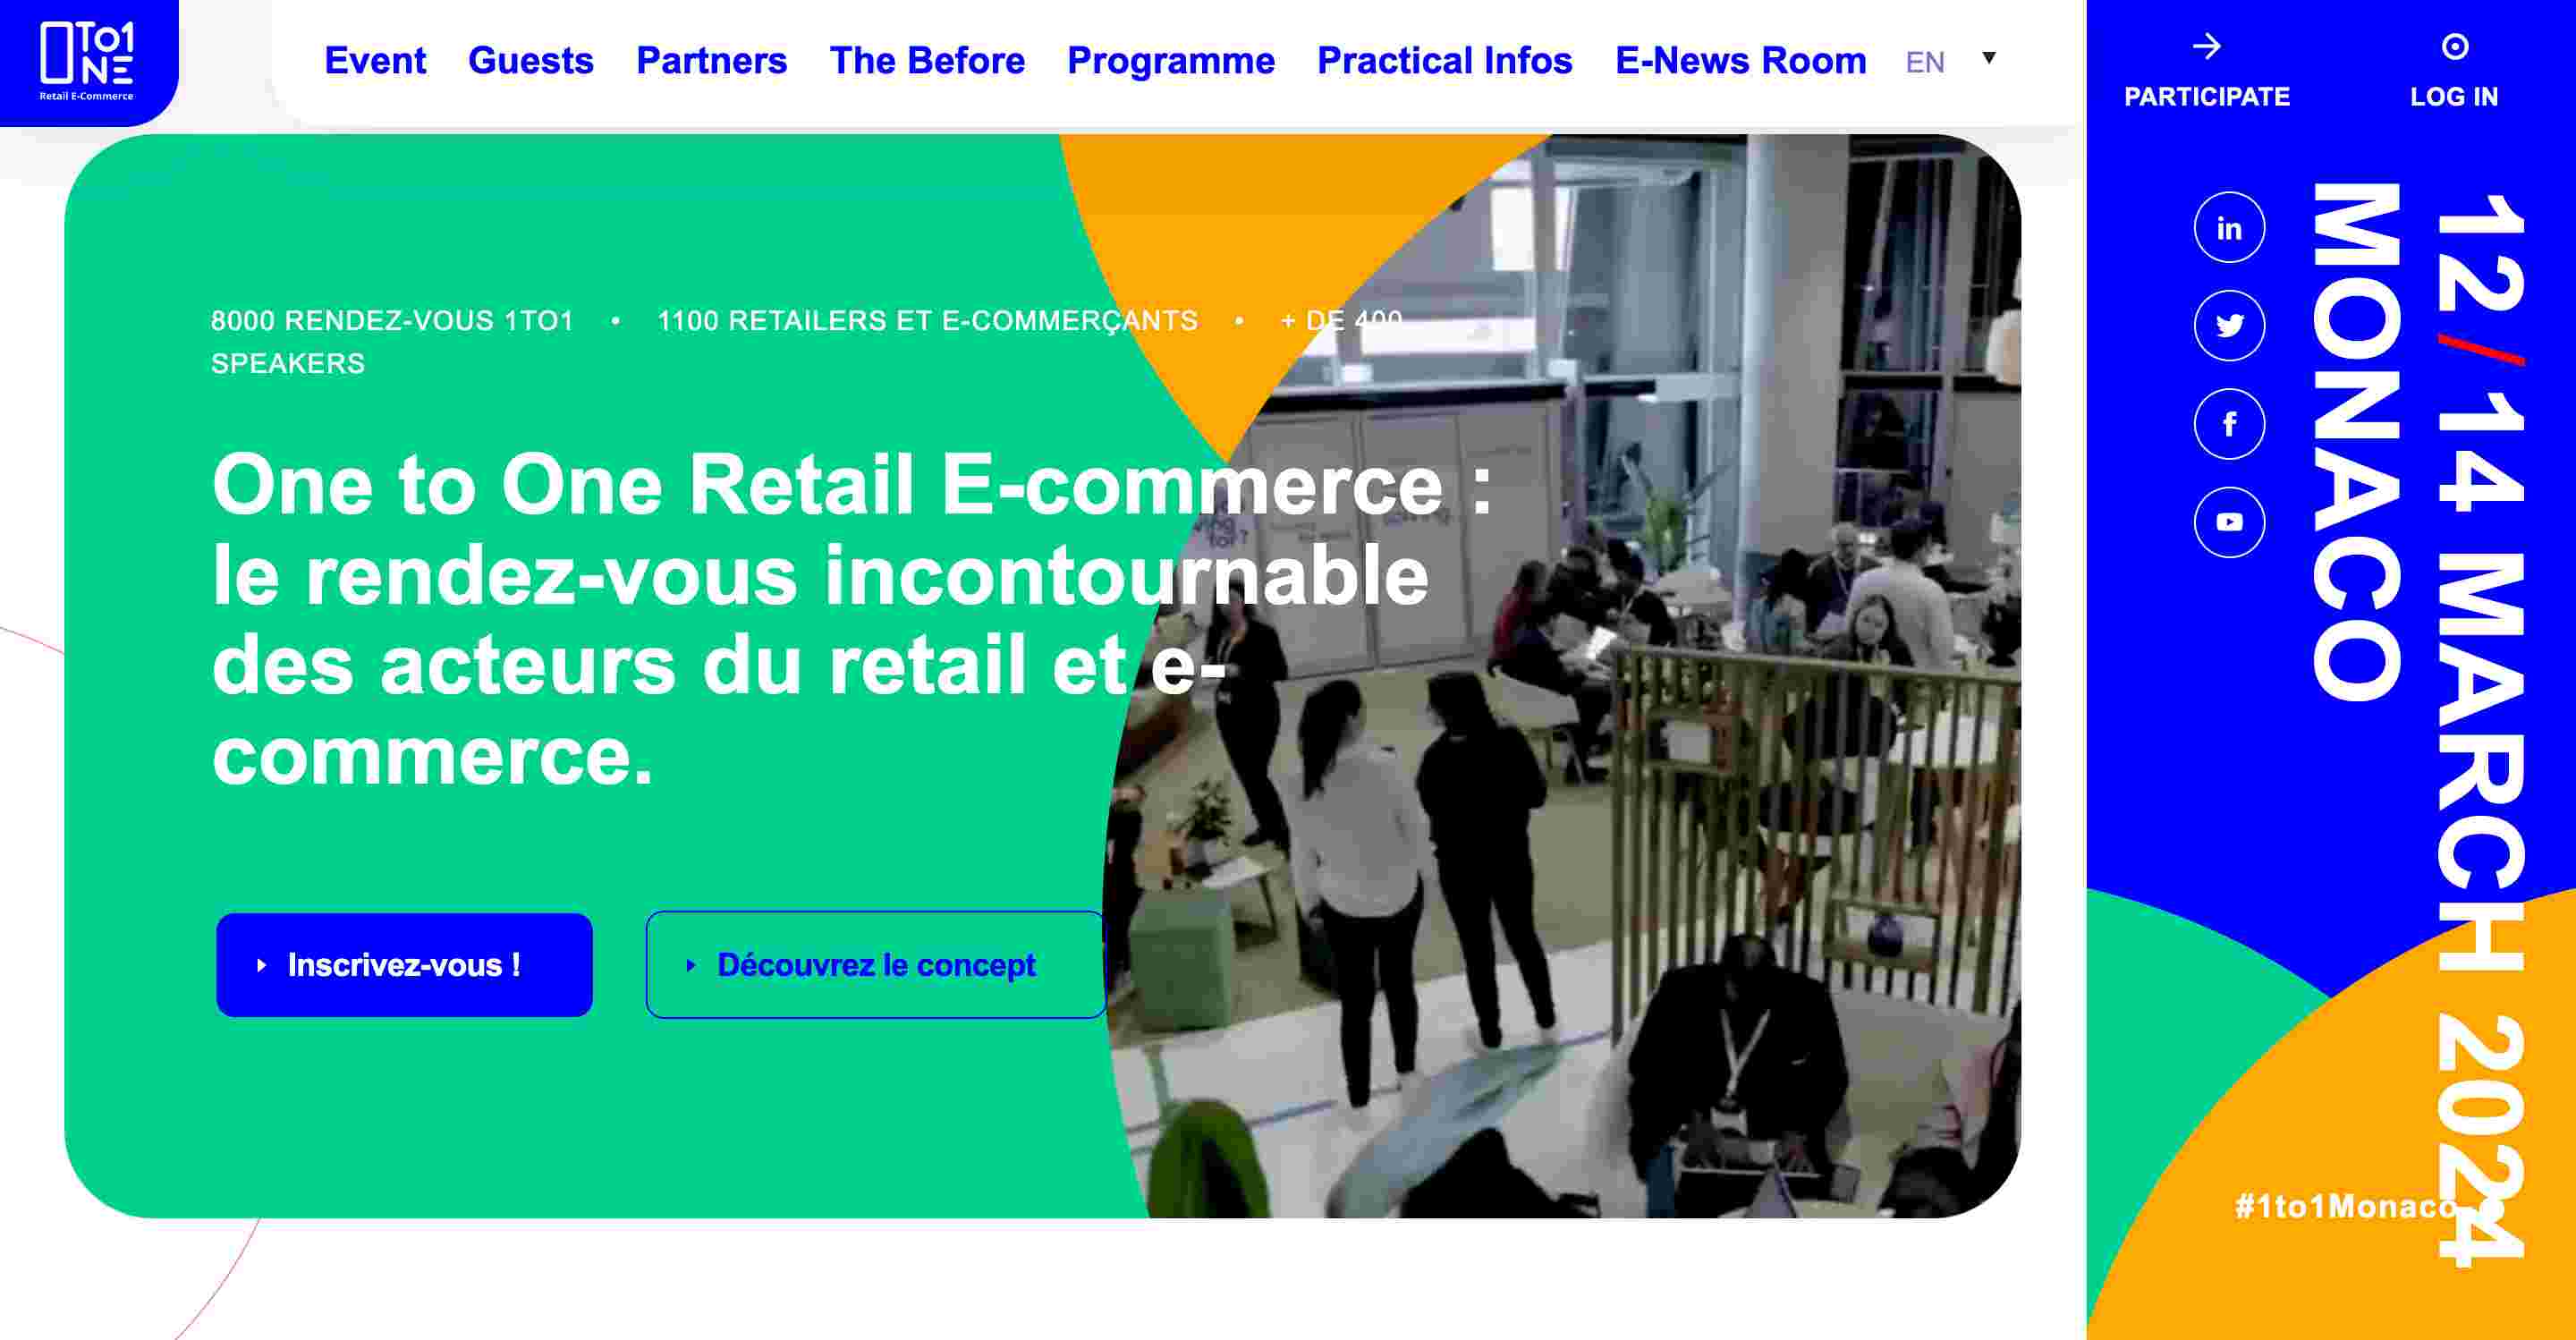 One to One Retail E-Commerce